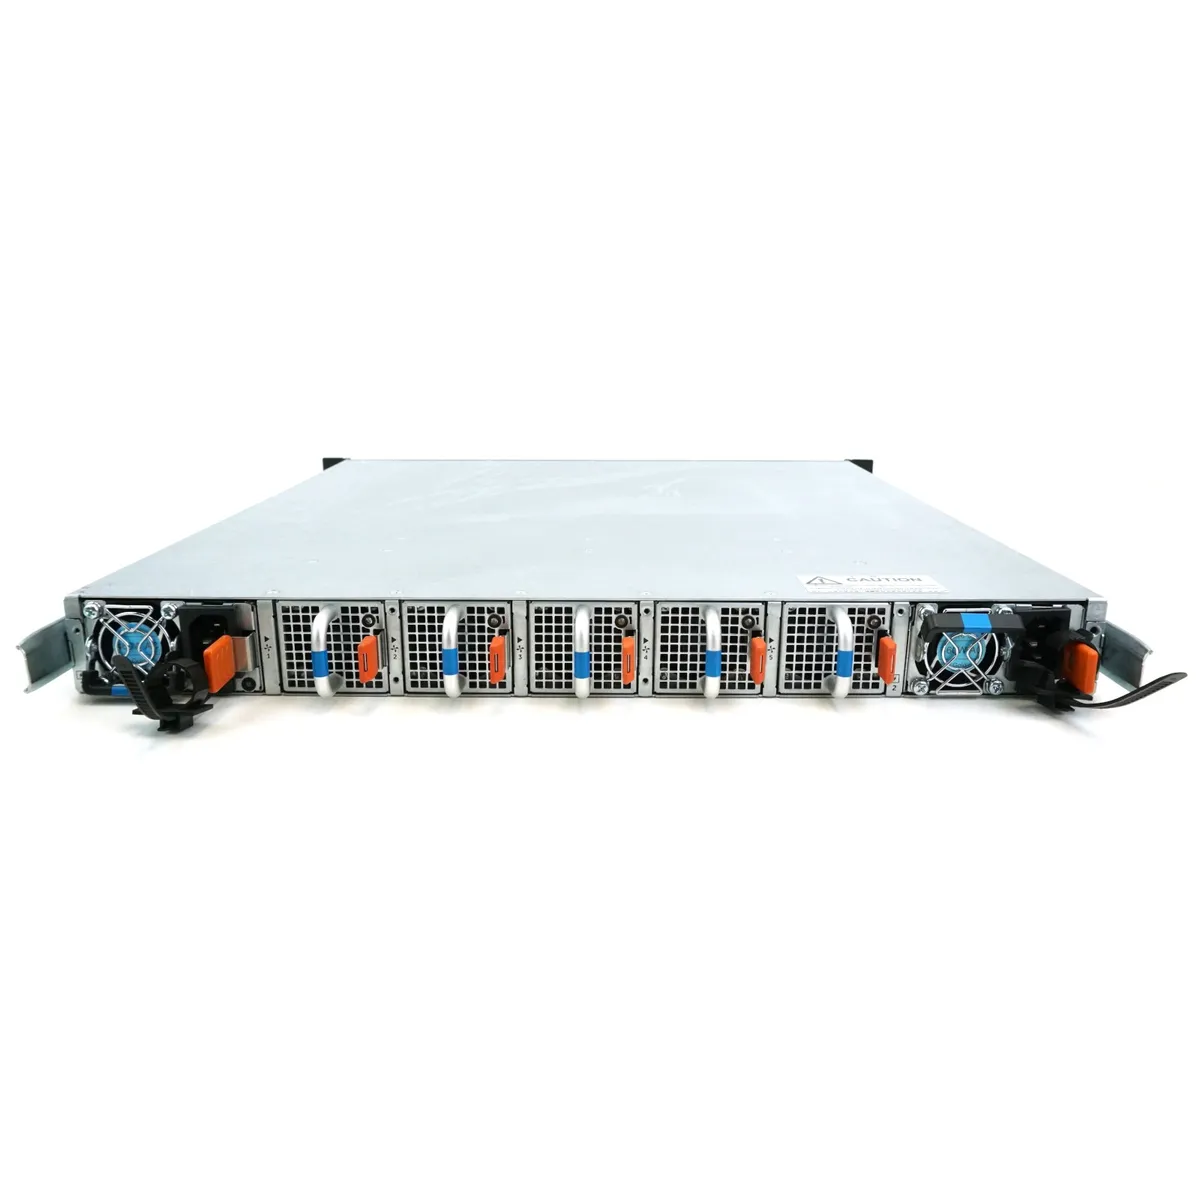 Dell EMC Networking S6010-ON 32 40Gbps QSFP+ Switch w/ Ears